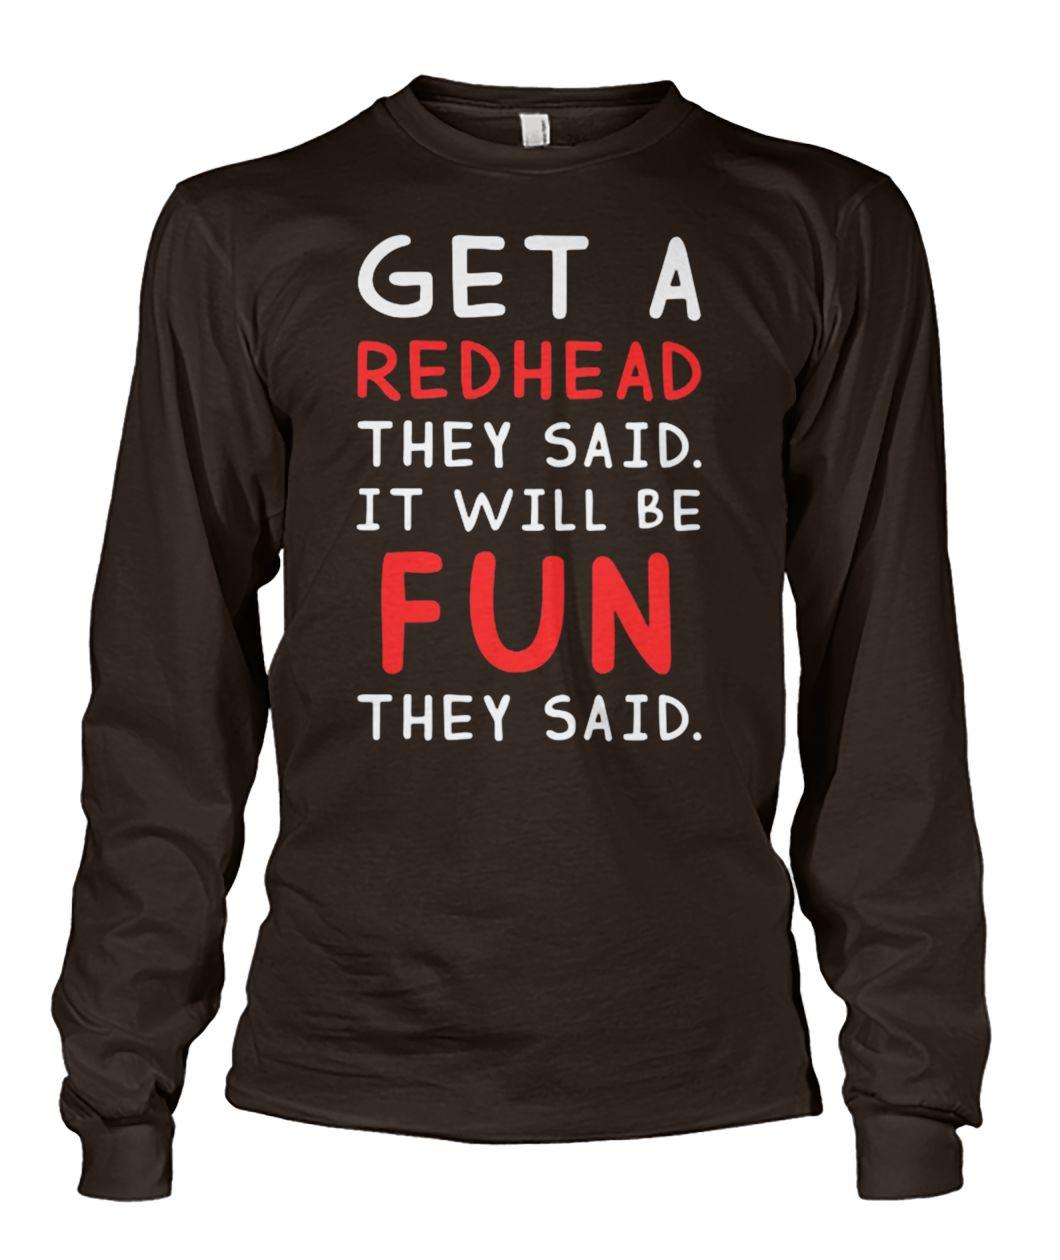 Get a redhead they said it will be fun they said unisex long sleeve